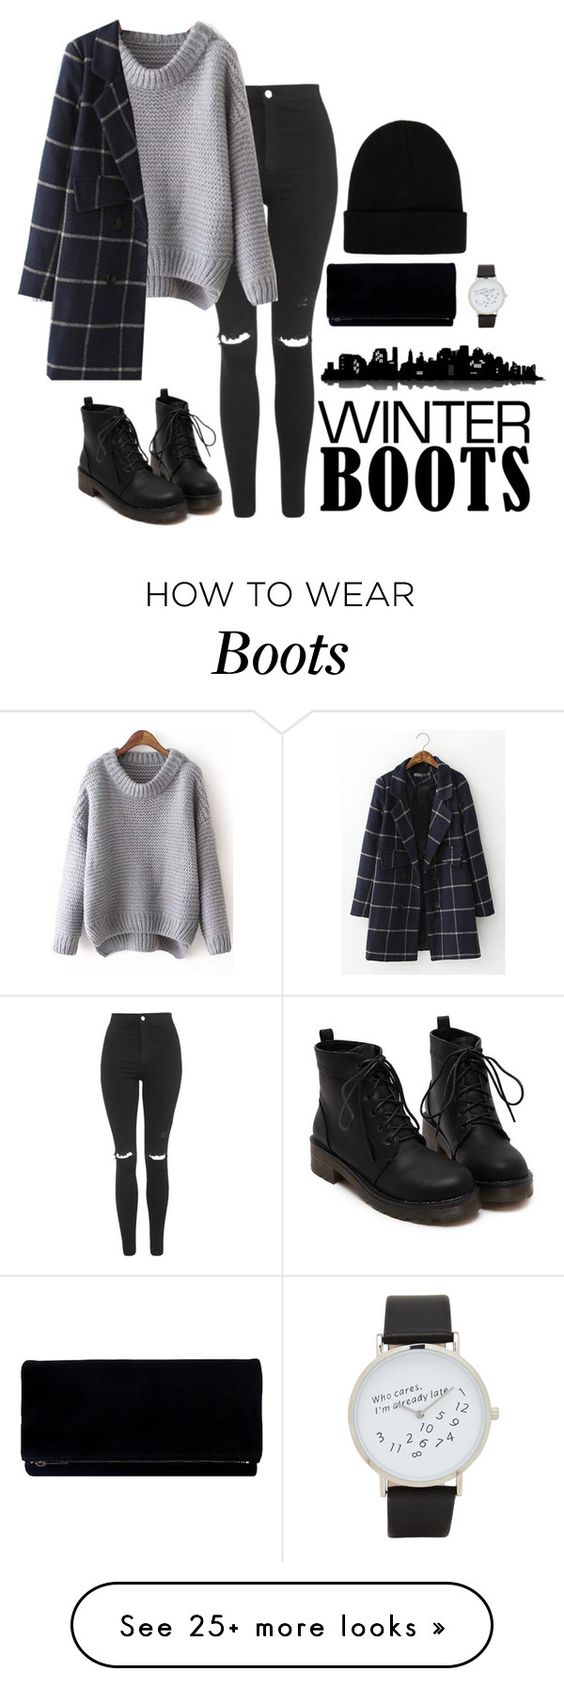 10 Gorgeous Ways to Style a Sweater